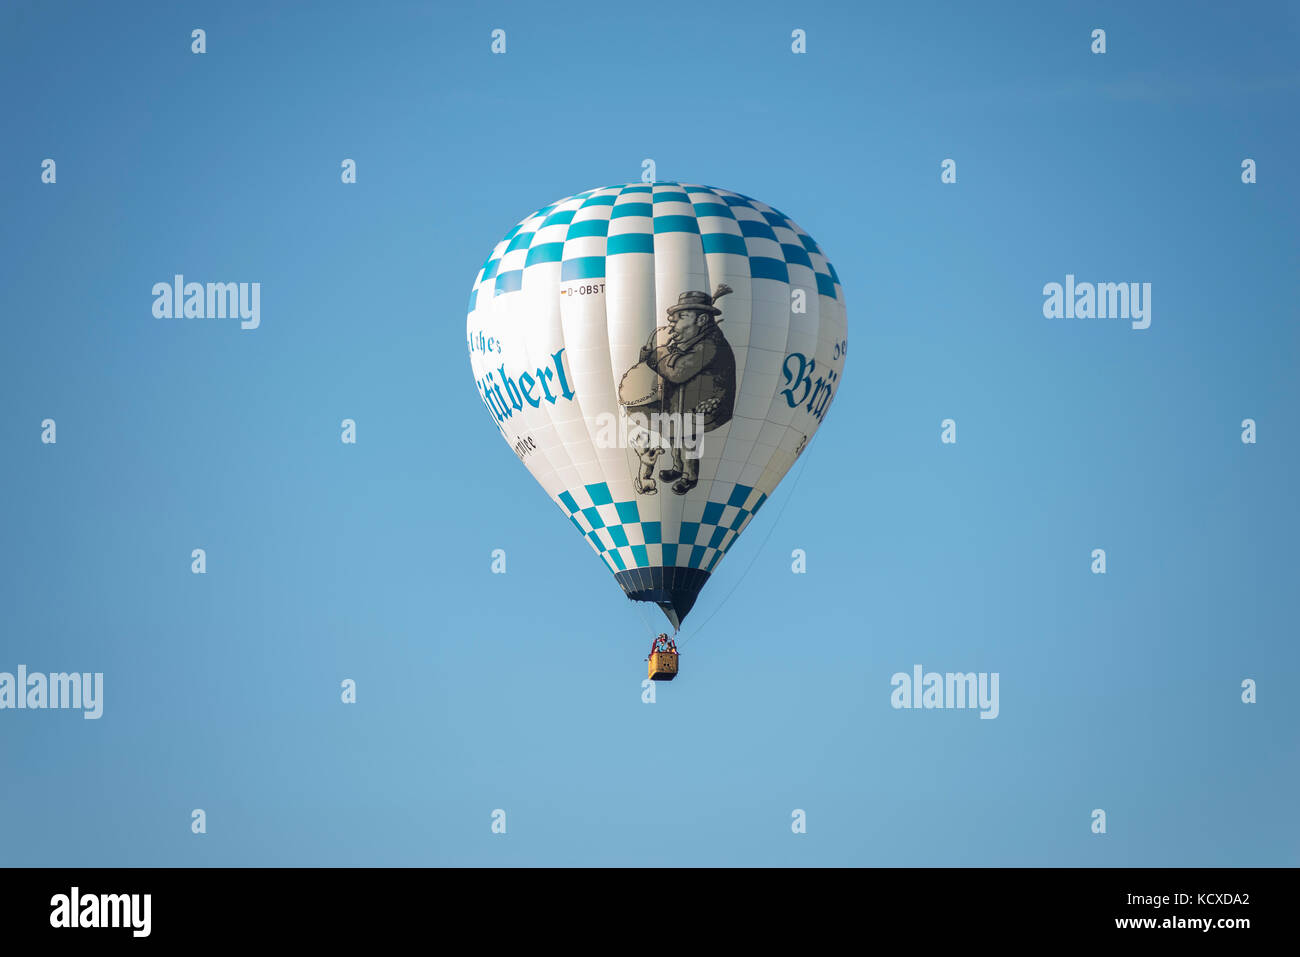 Blue and white hot-air balloon drivers with lettering Bräustüberl and drawing of a man and a dog in the sky in the morning sun, Bavaria, Germany Stock Photo